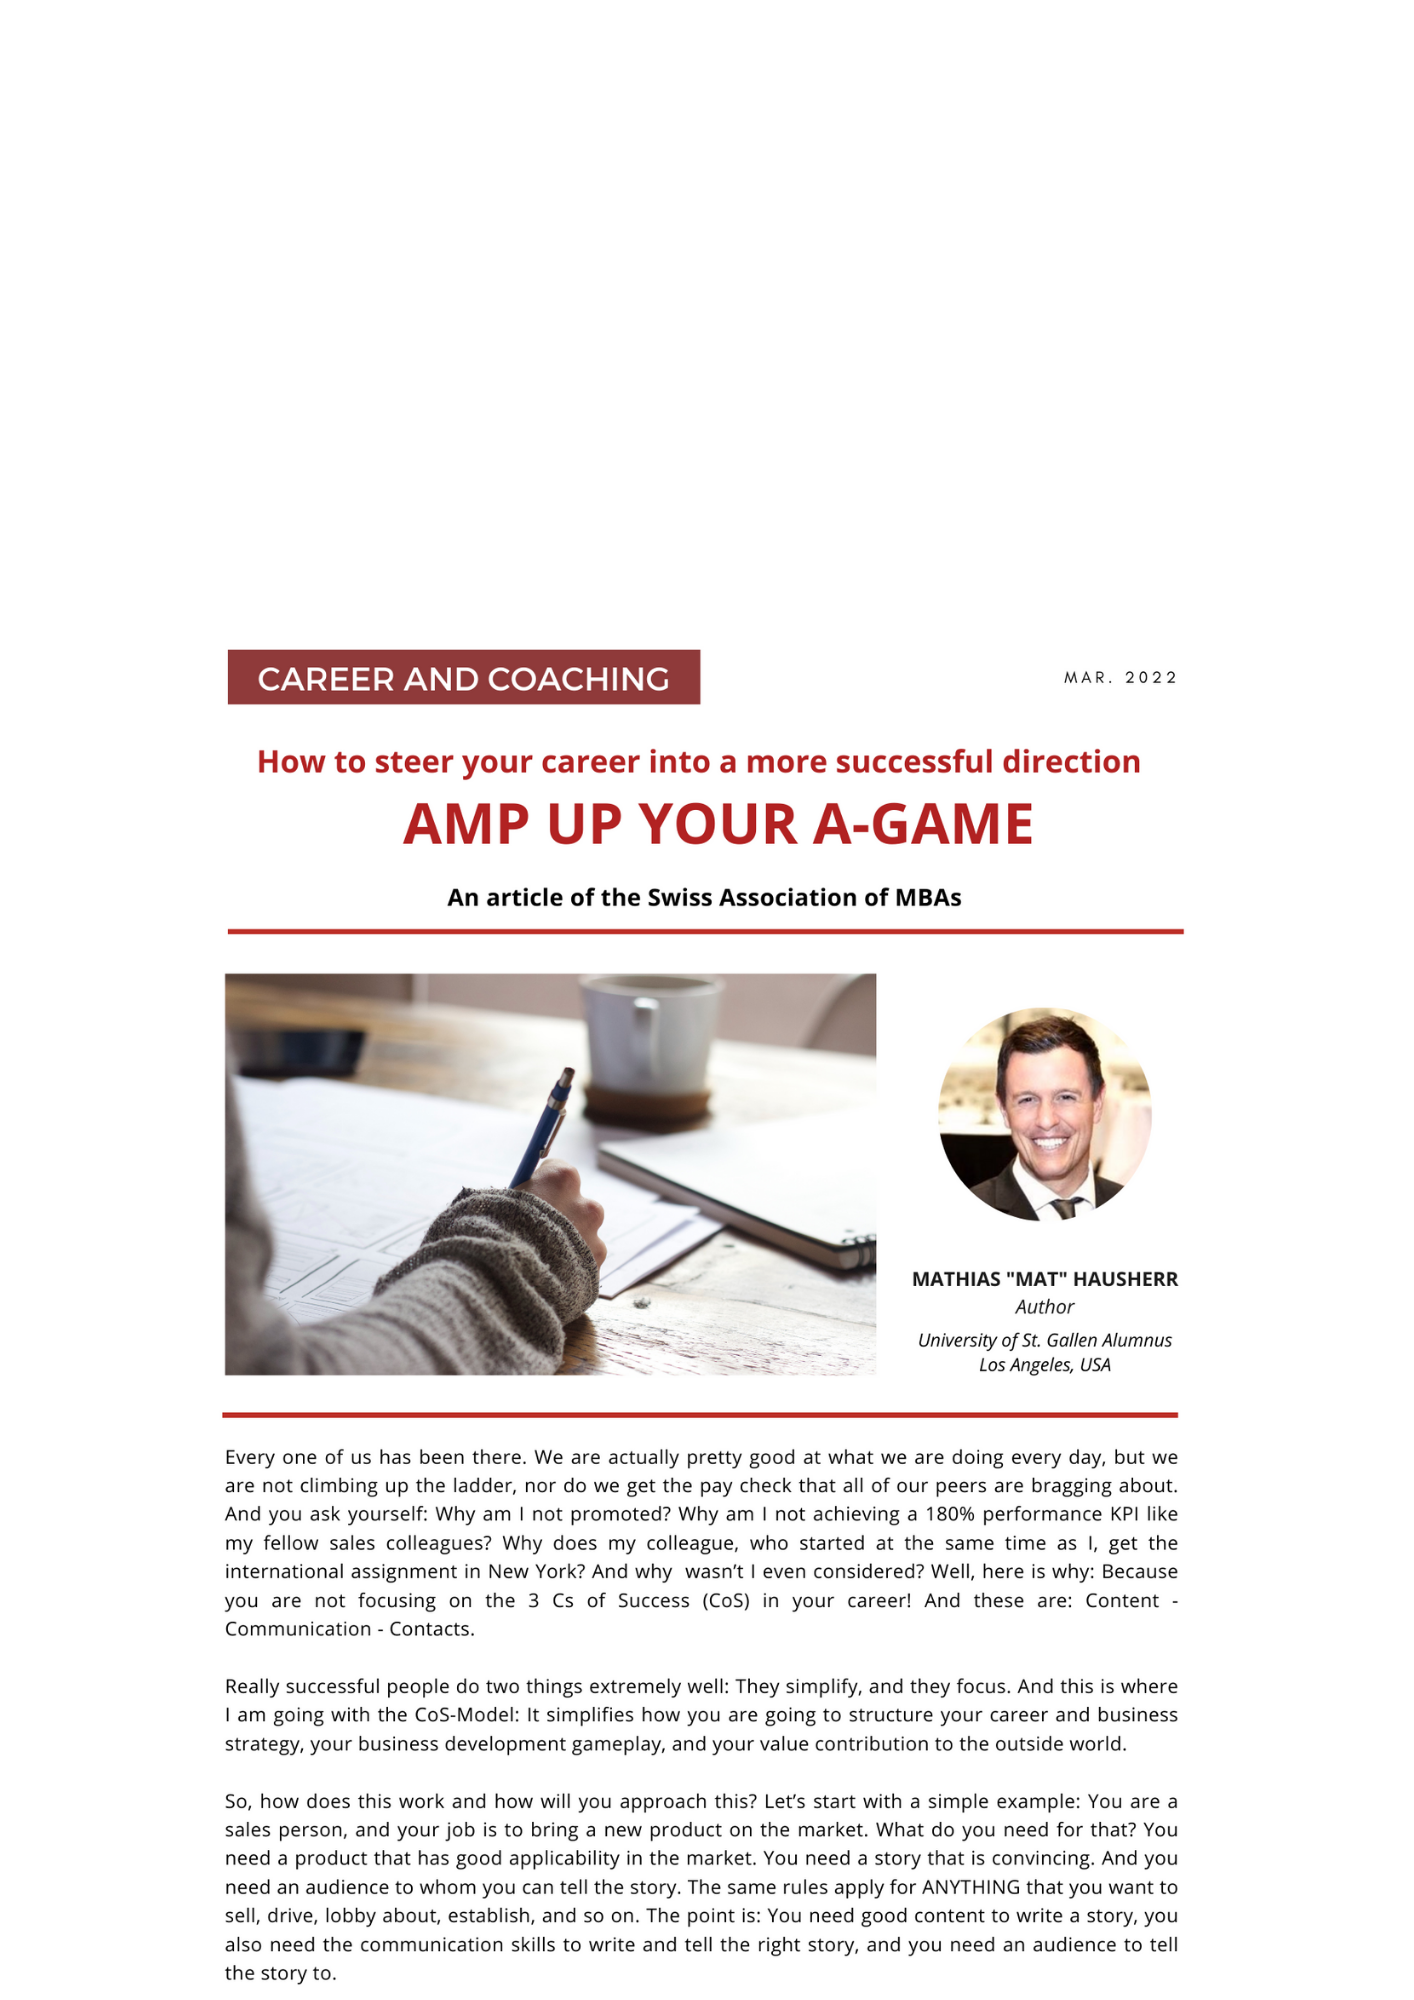 How to steer your career into a more successful direction - AMP UP YOUR A-GAME